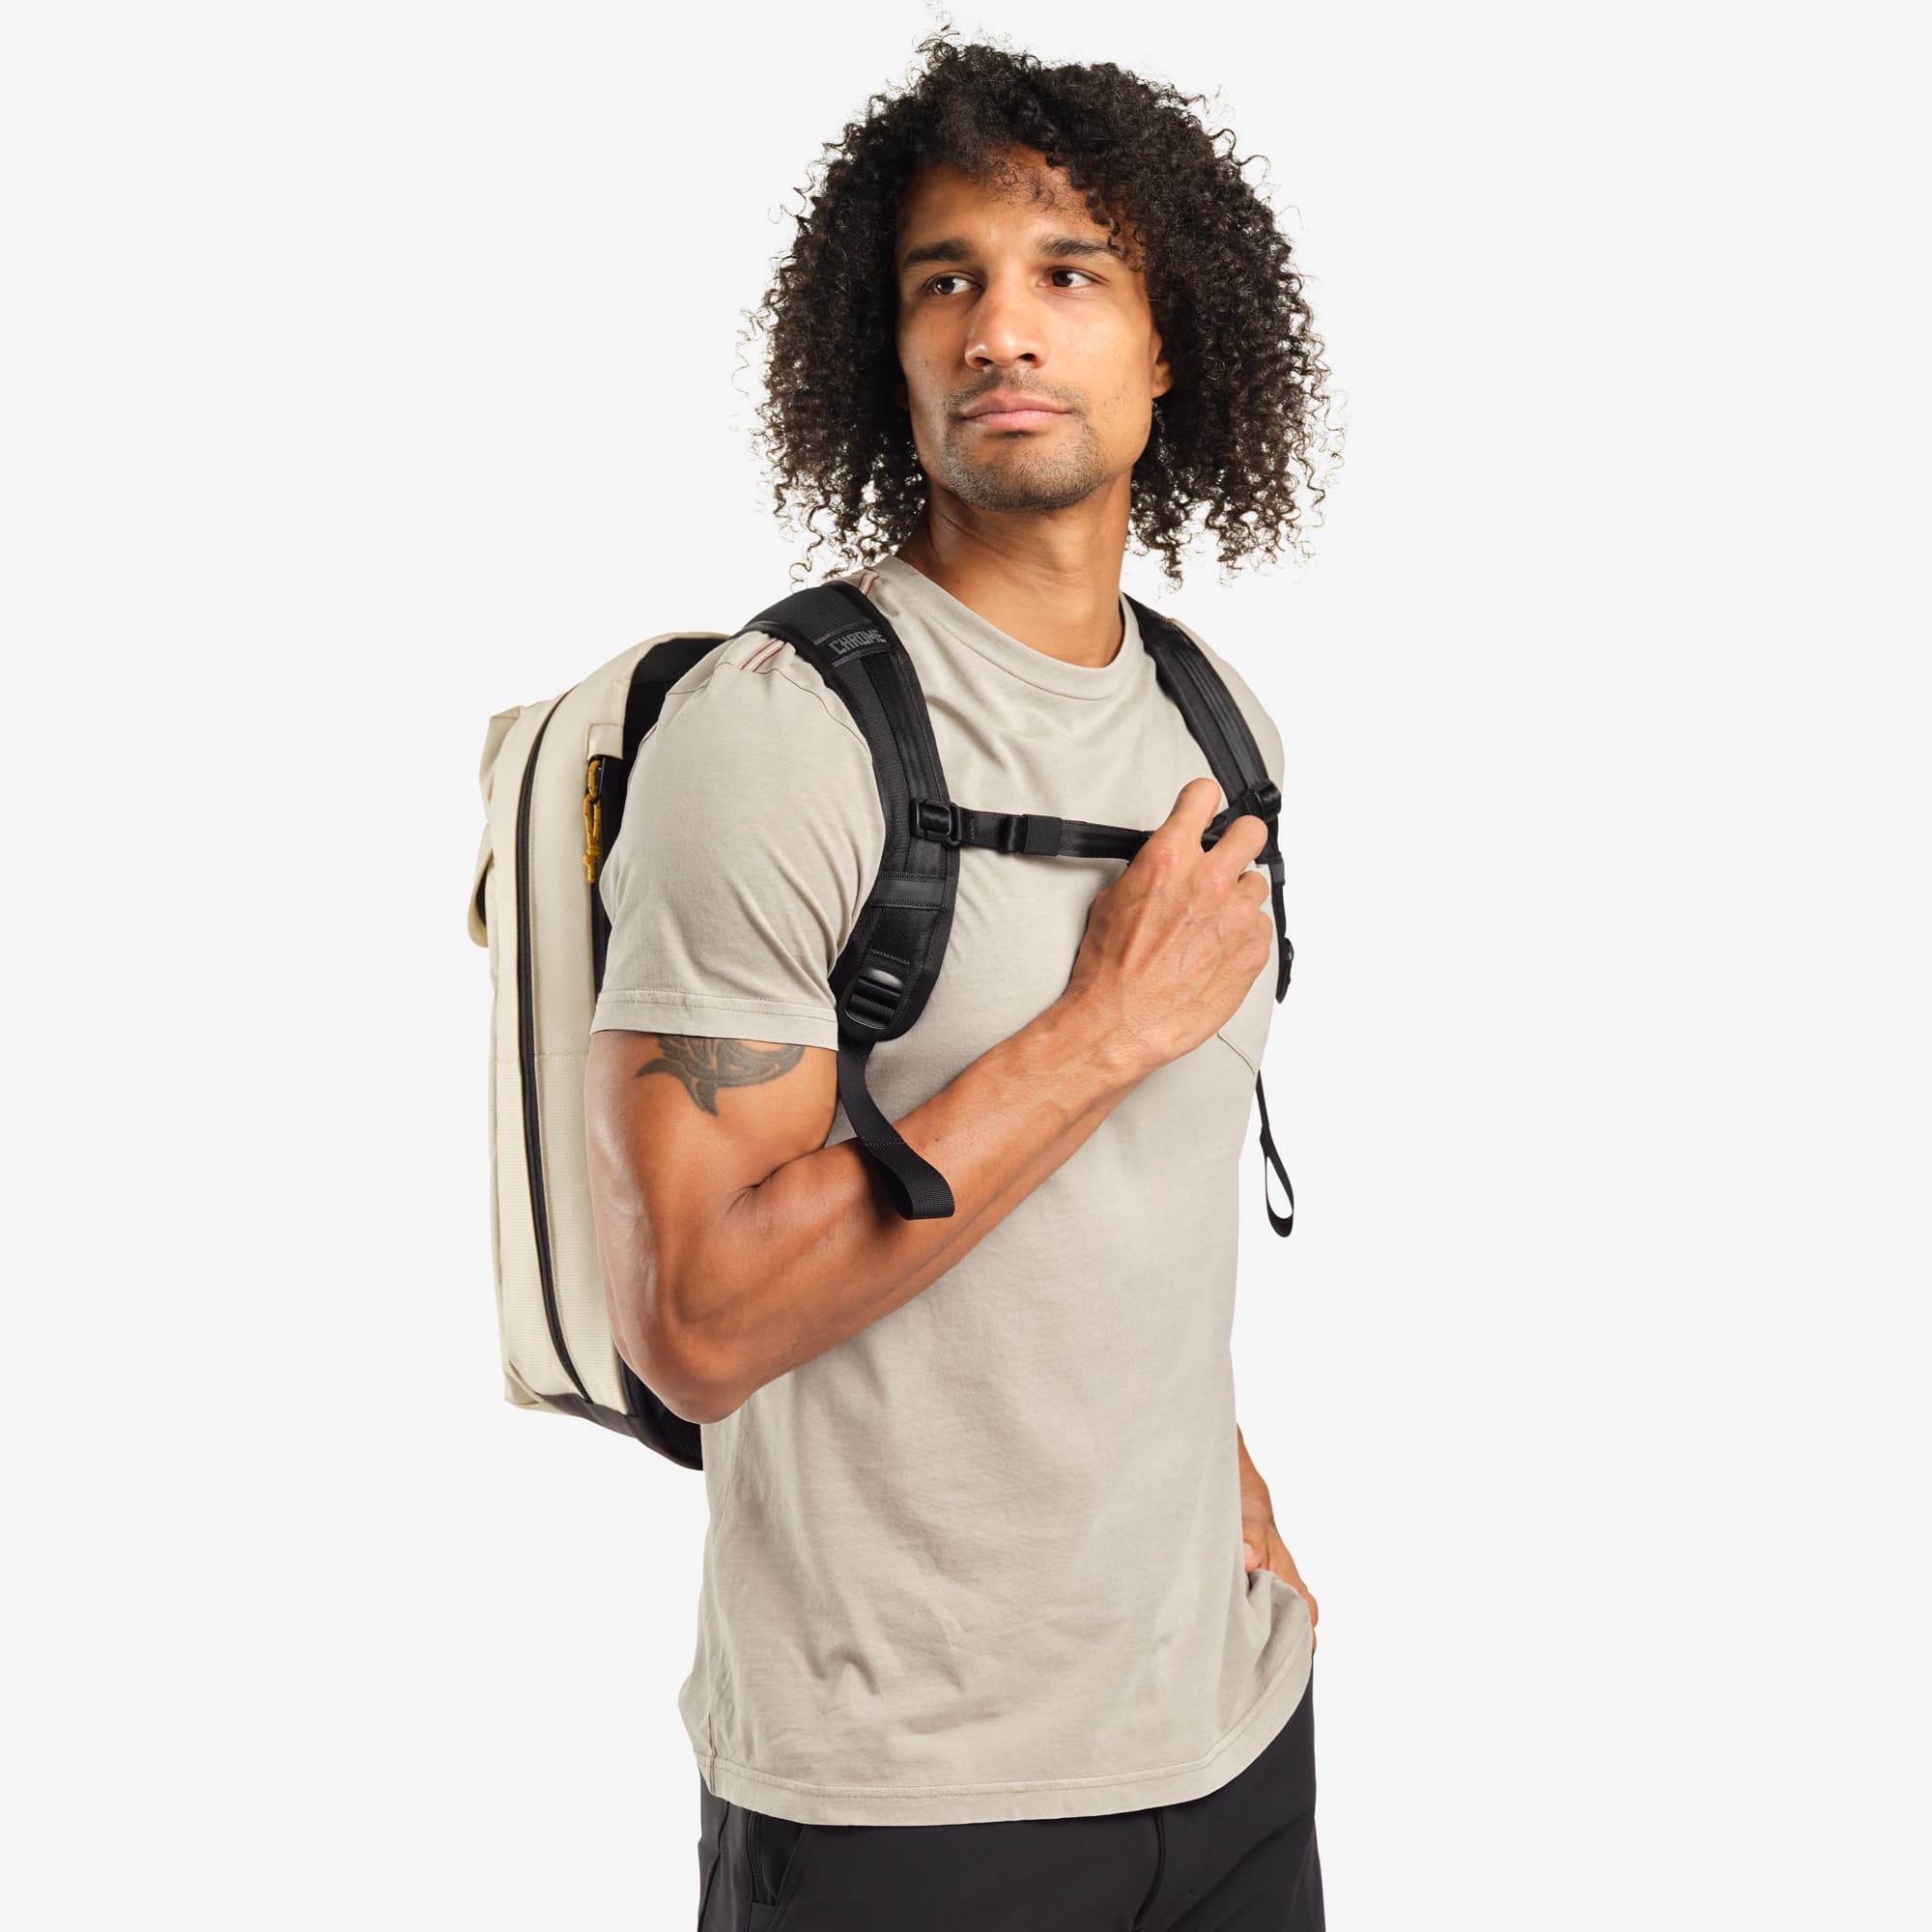 Ruckas 23L Backpack in natural worn by a man front view #color_natural